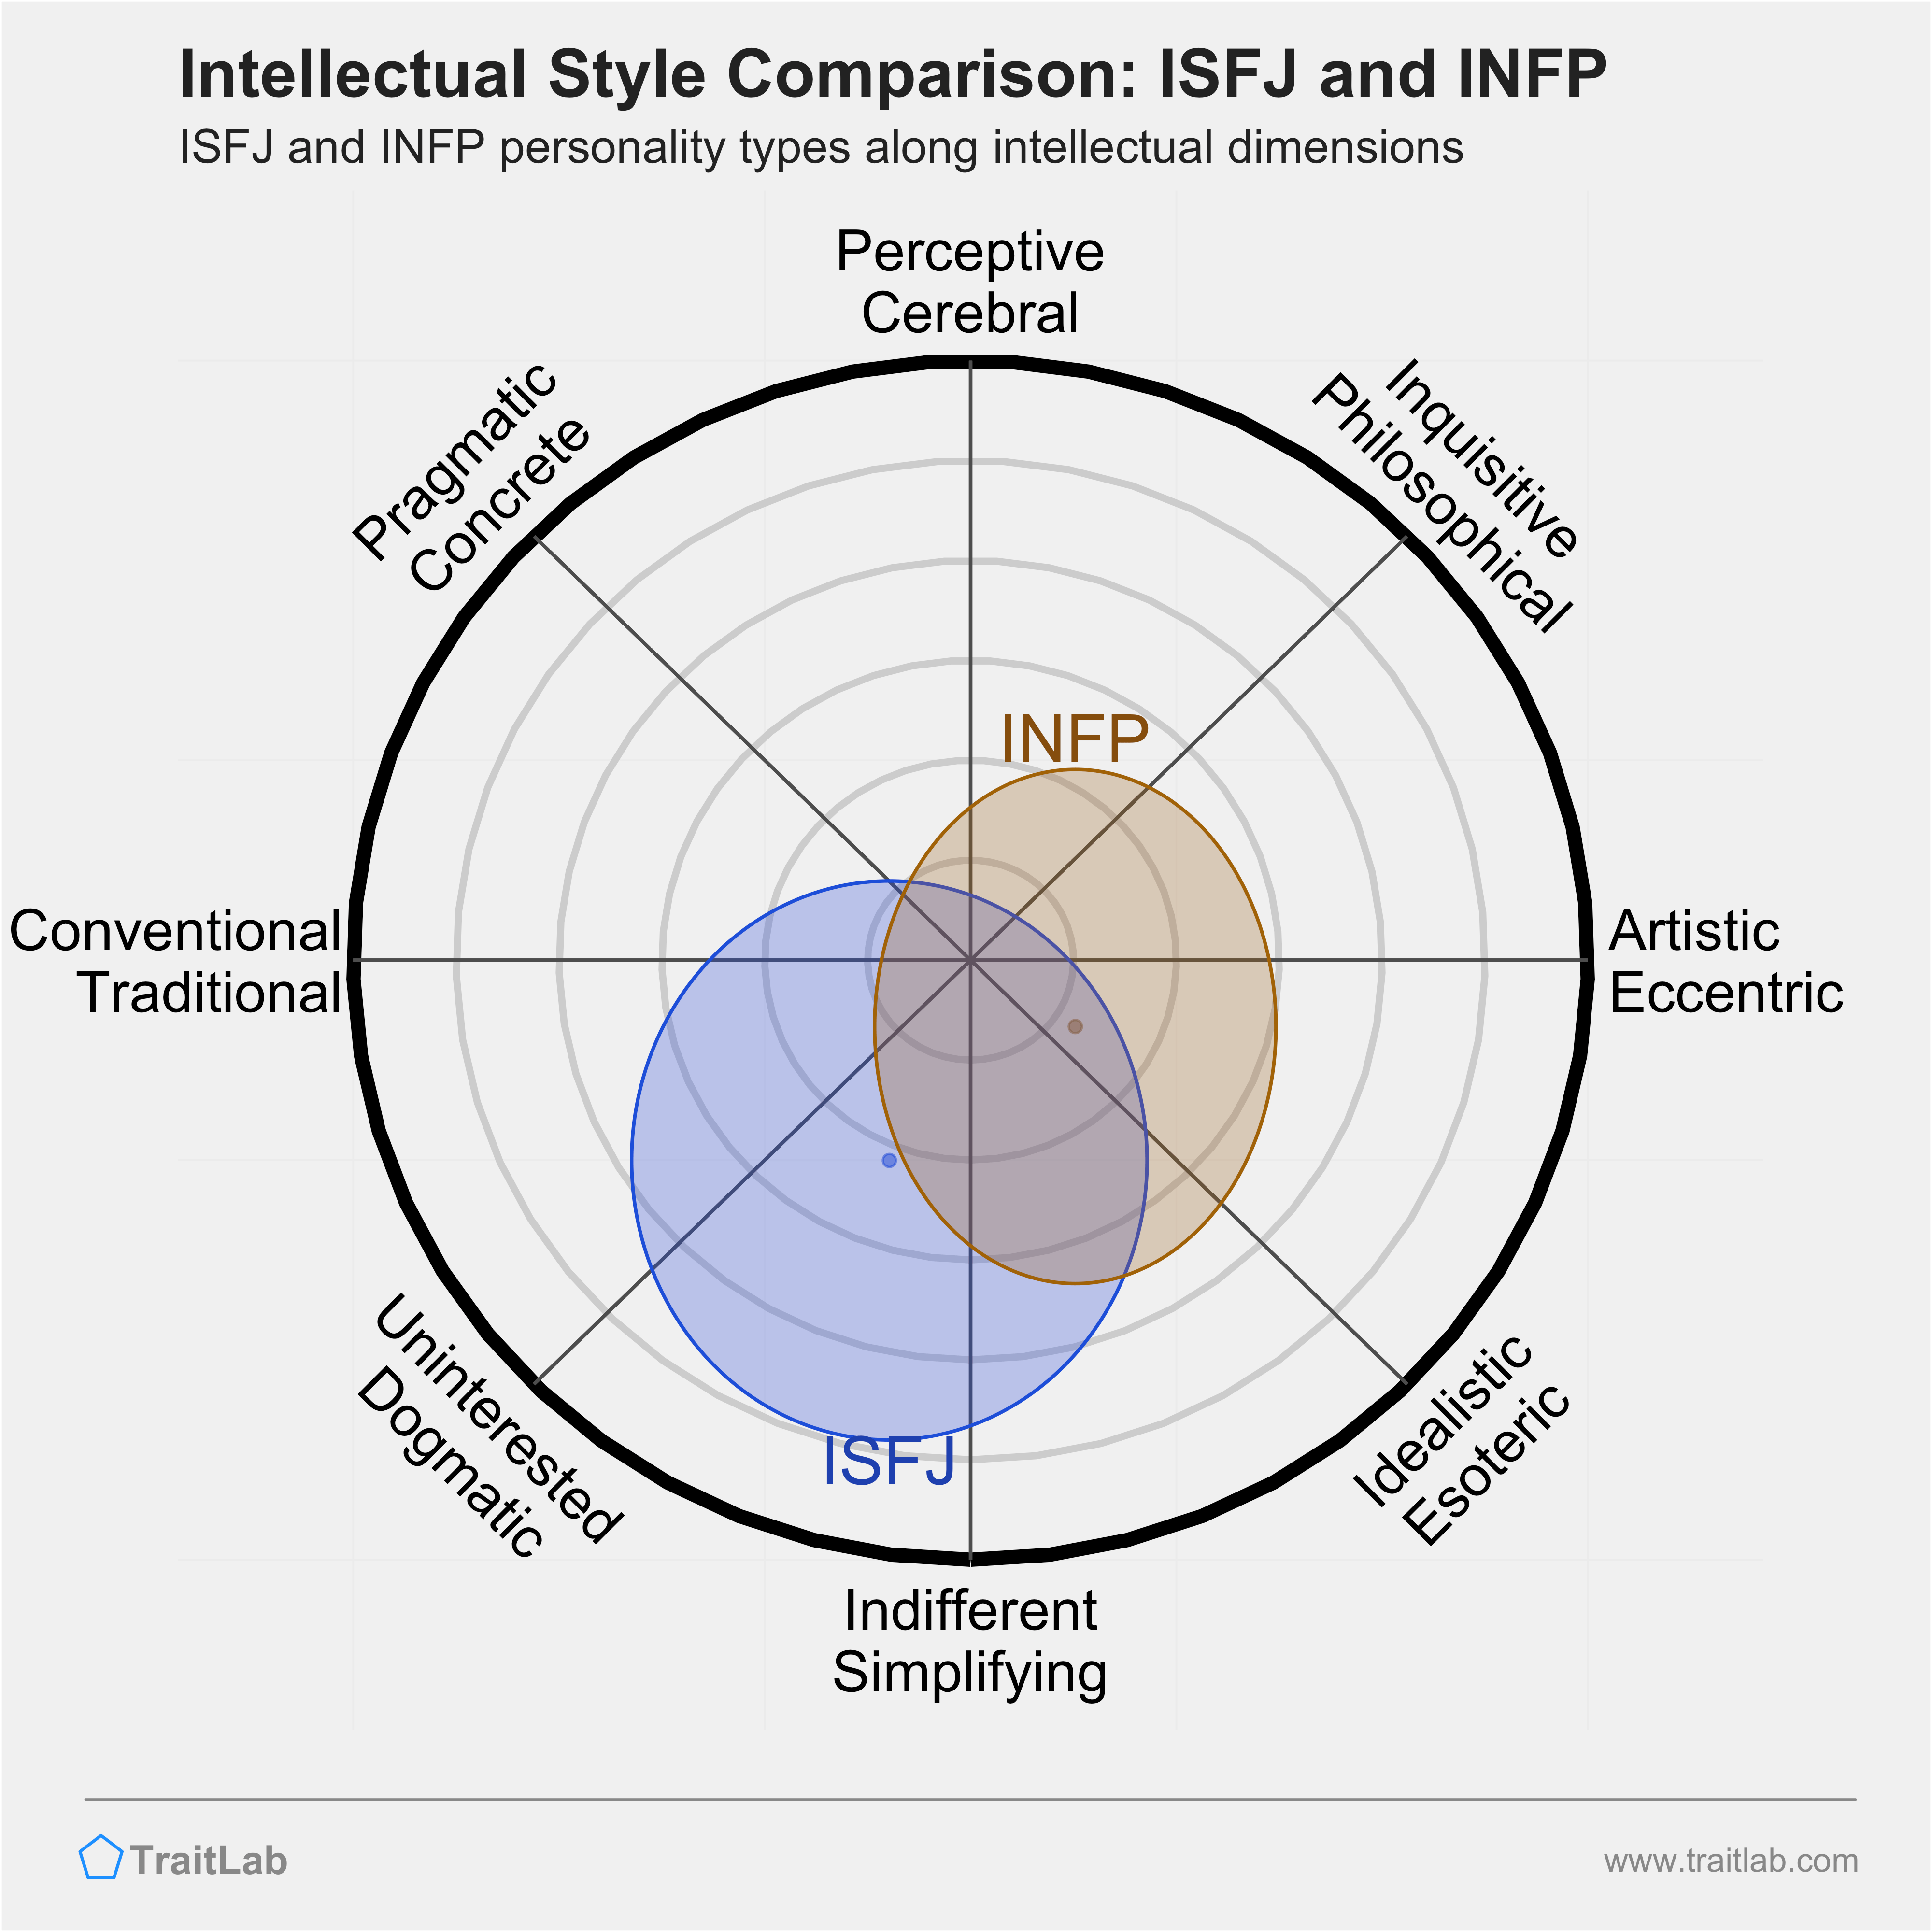 ISFJ and INFP comparison across intellectual dimensions